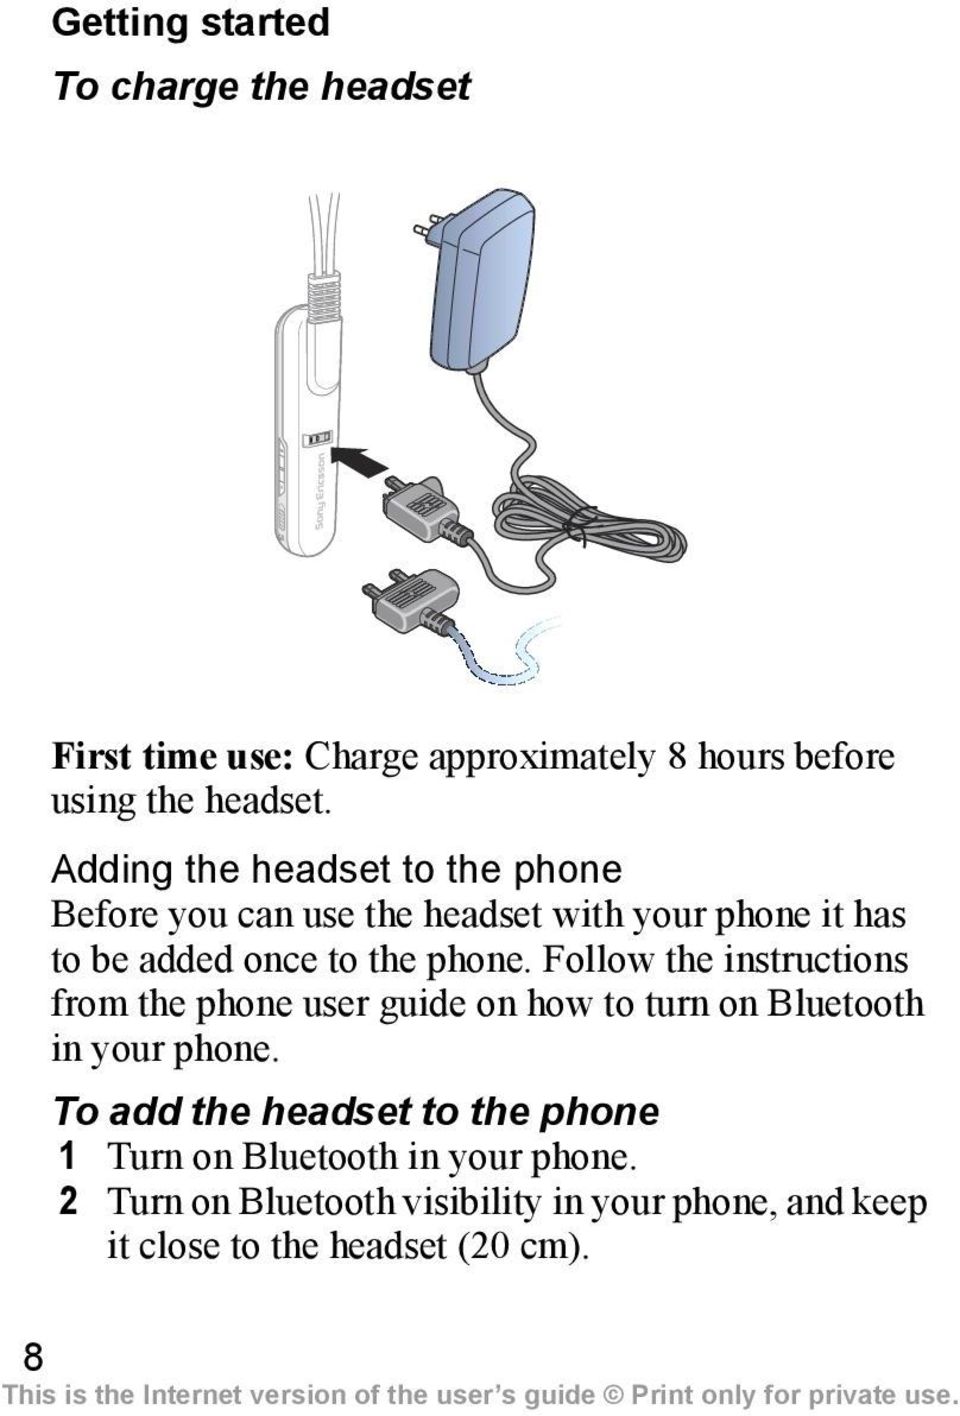 Follow the instructions from the phone user guide on how to turn on Bluetooth in your phone.